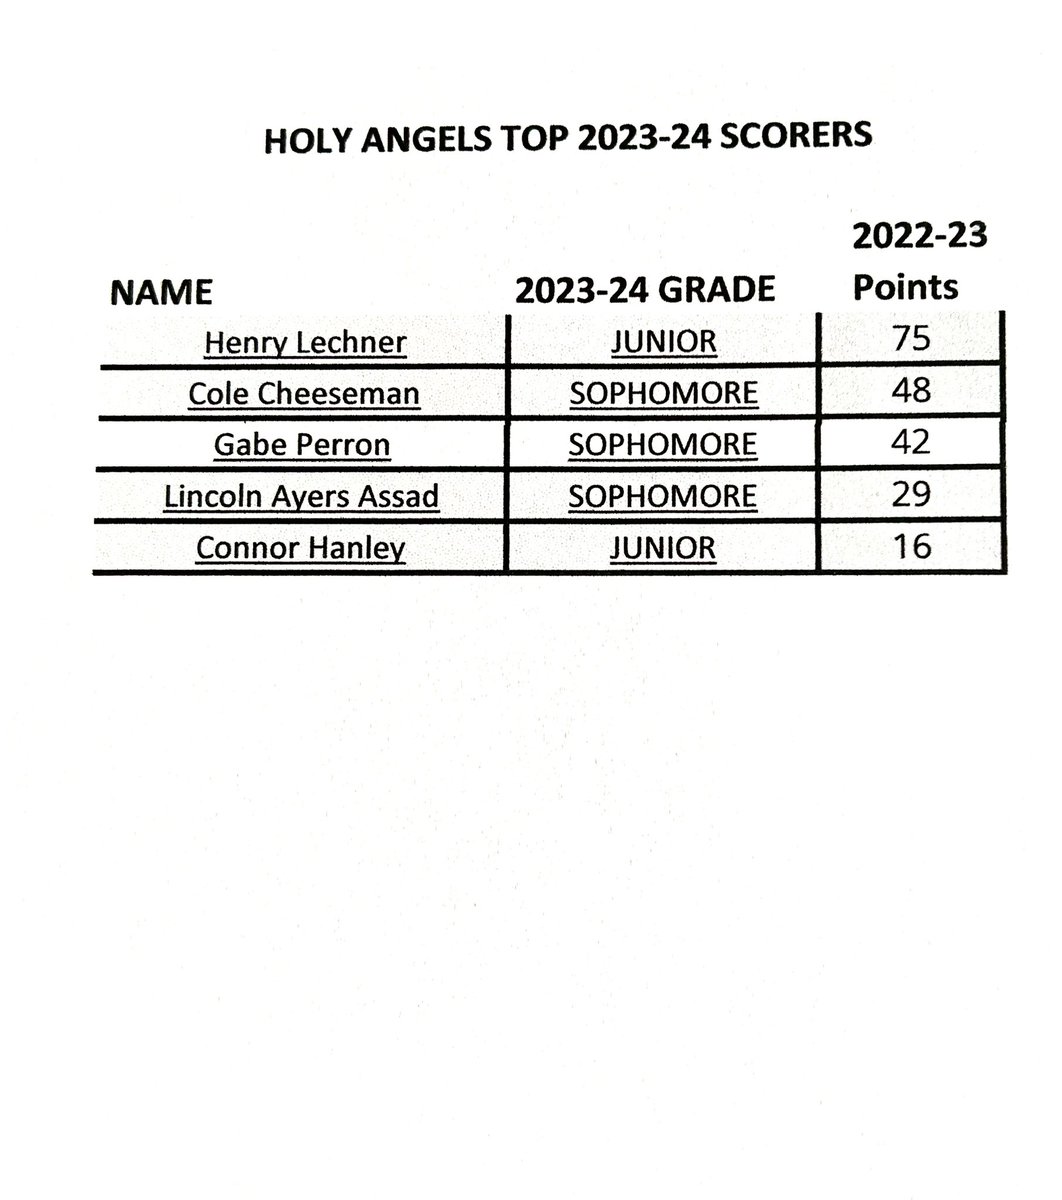 Fab5  is at Richfield Ice Arena.  @HolyAngelsPuck team summer clinics have begun for next season . Incredible amount of young returning talent.  Likely top scorers for next year are shown below , will top prospect Henry Lechner hit 100 points ?